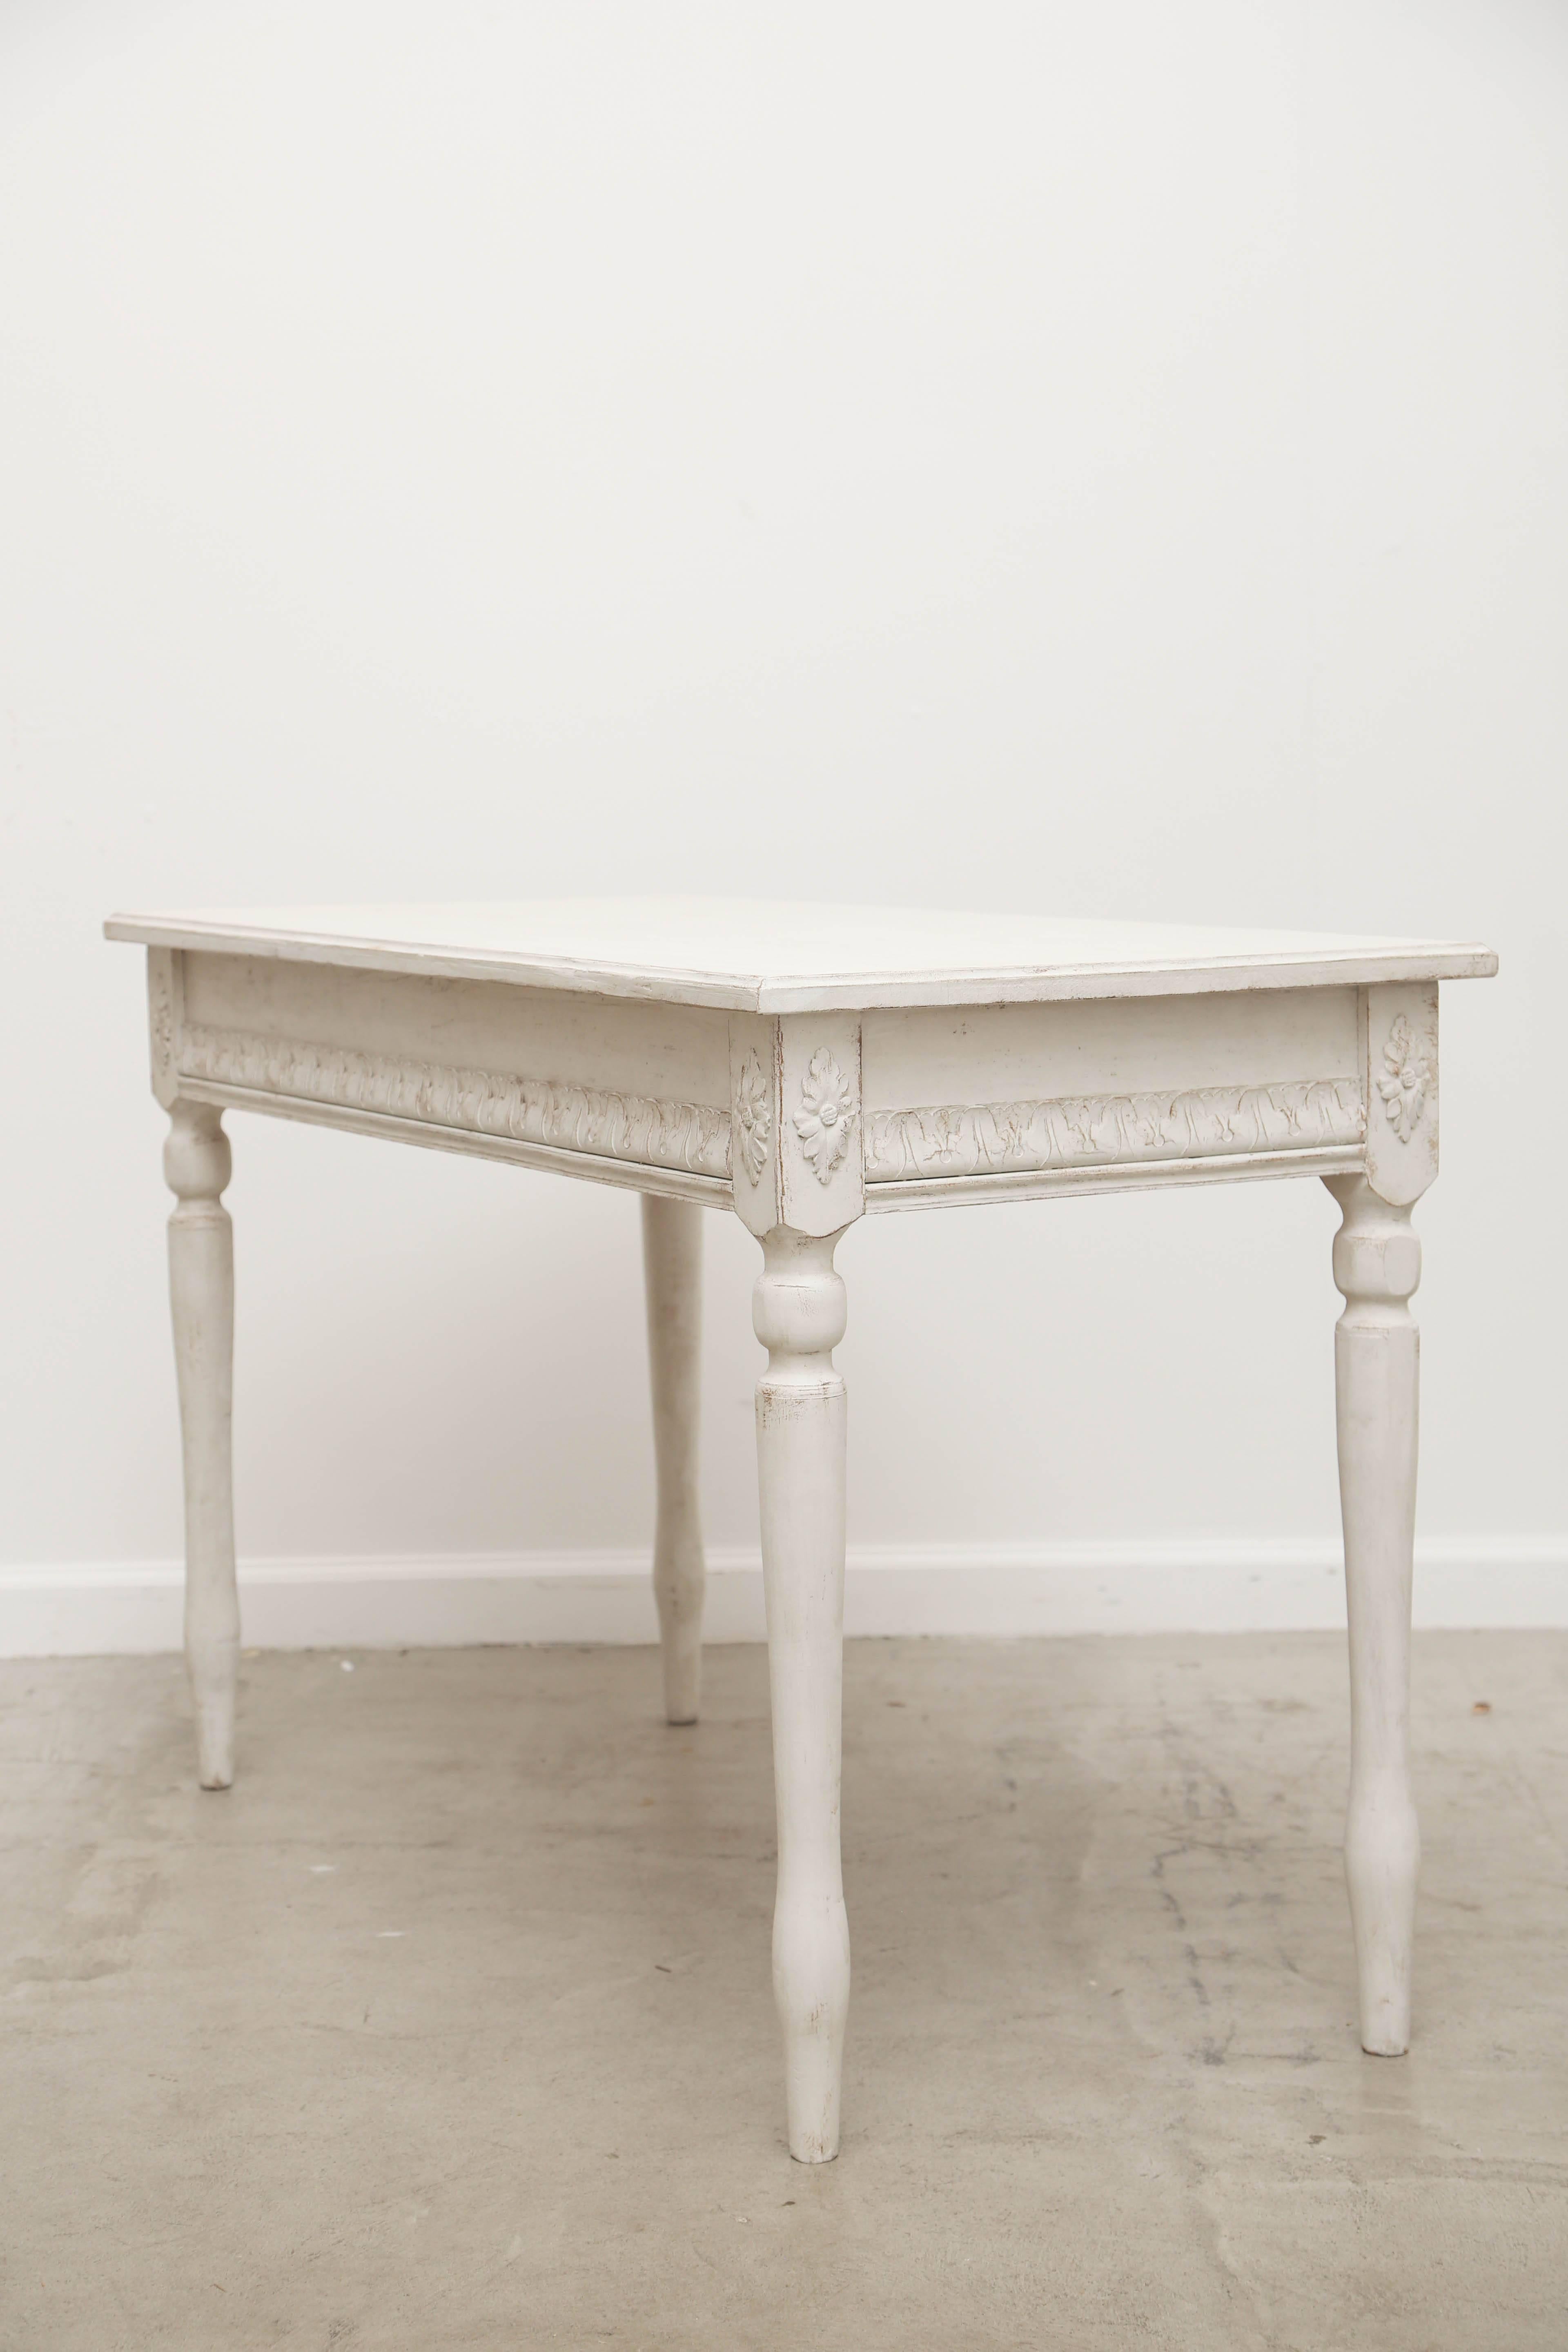 Wood Pair of Antique Swedish Painted Console Tables, Late 19th Century For Sale